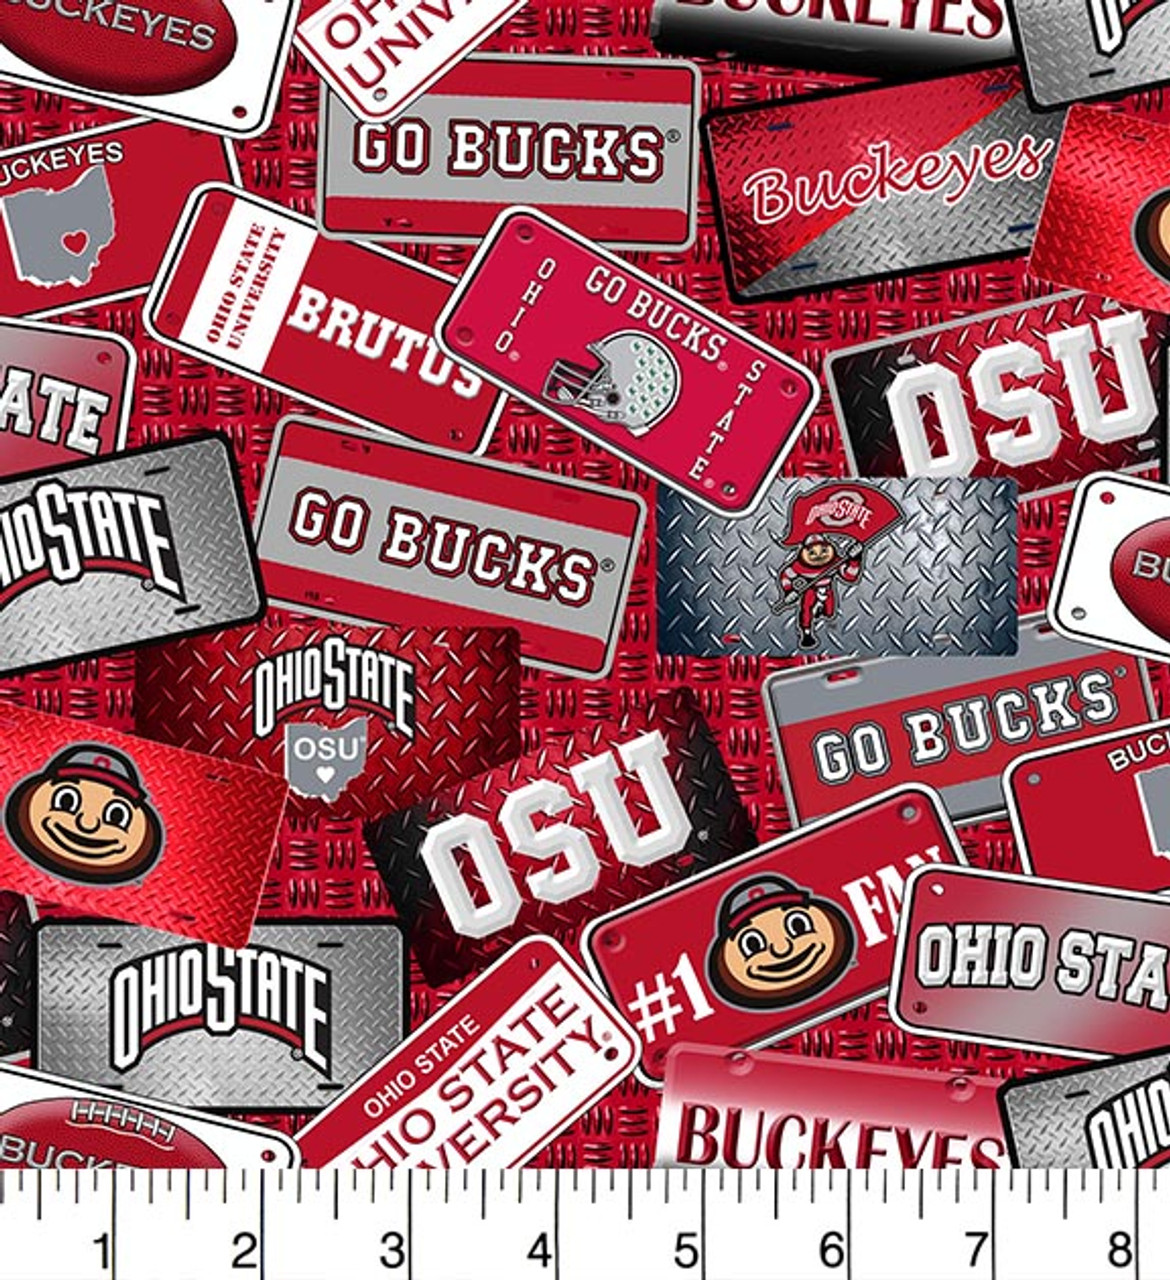 Ohio State University Buckeyes Cotton Fabric with License Plate Print and Matching Solid Cotton Fabrics